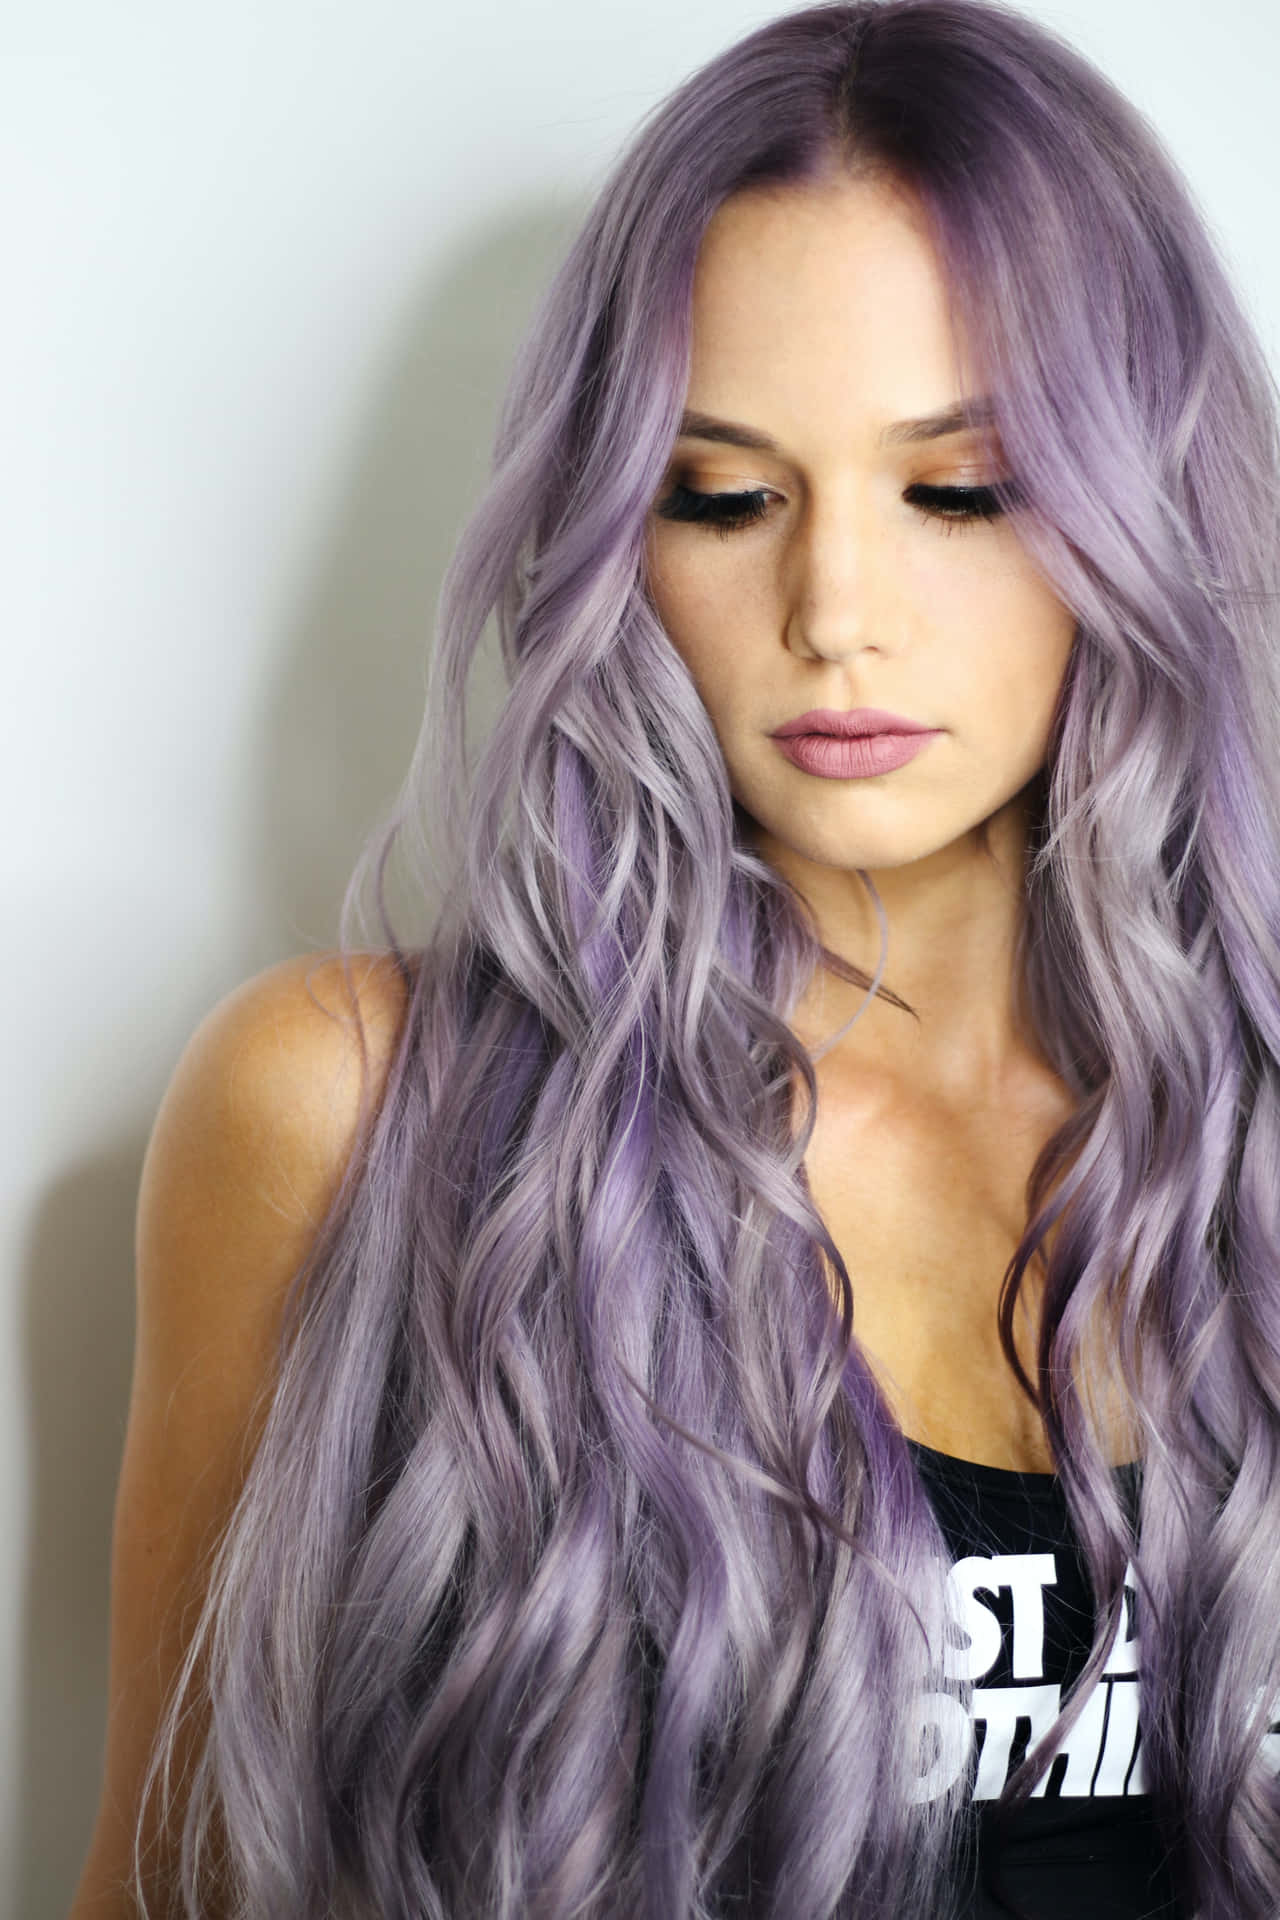 Linda Chica With Lavender Hair Wallpaper